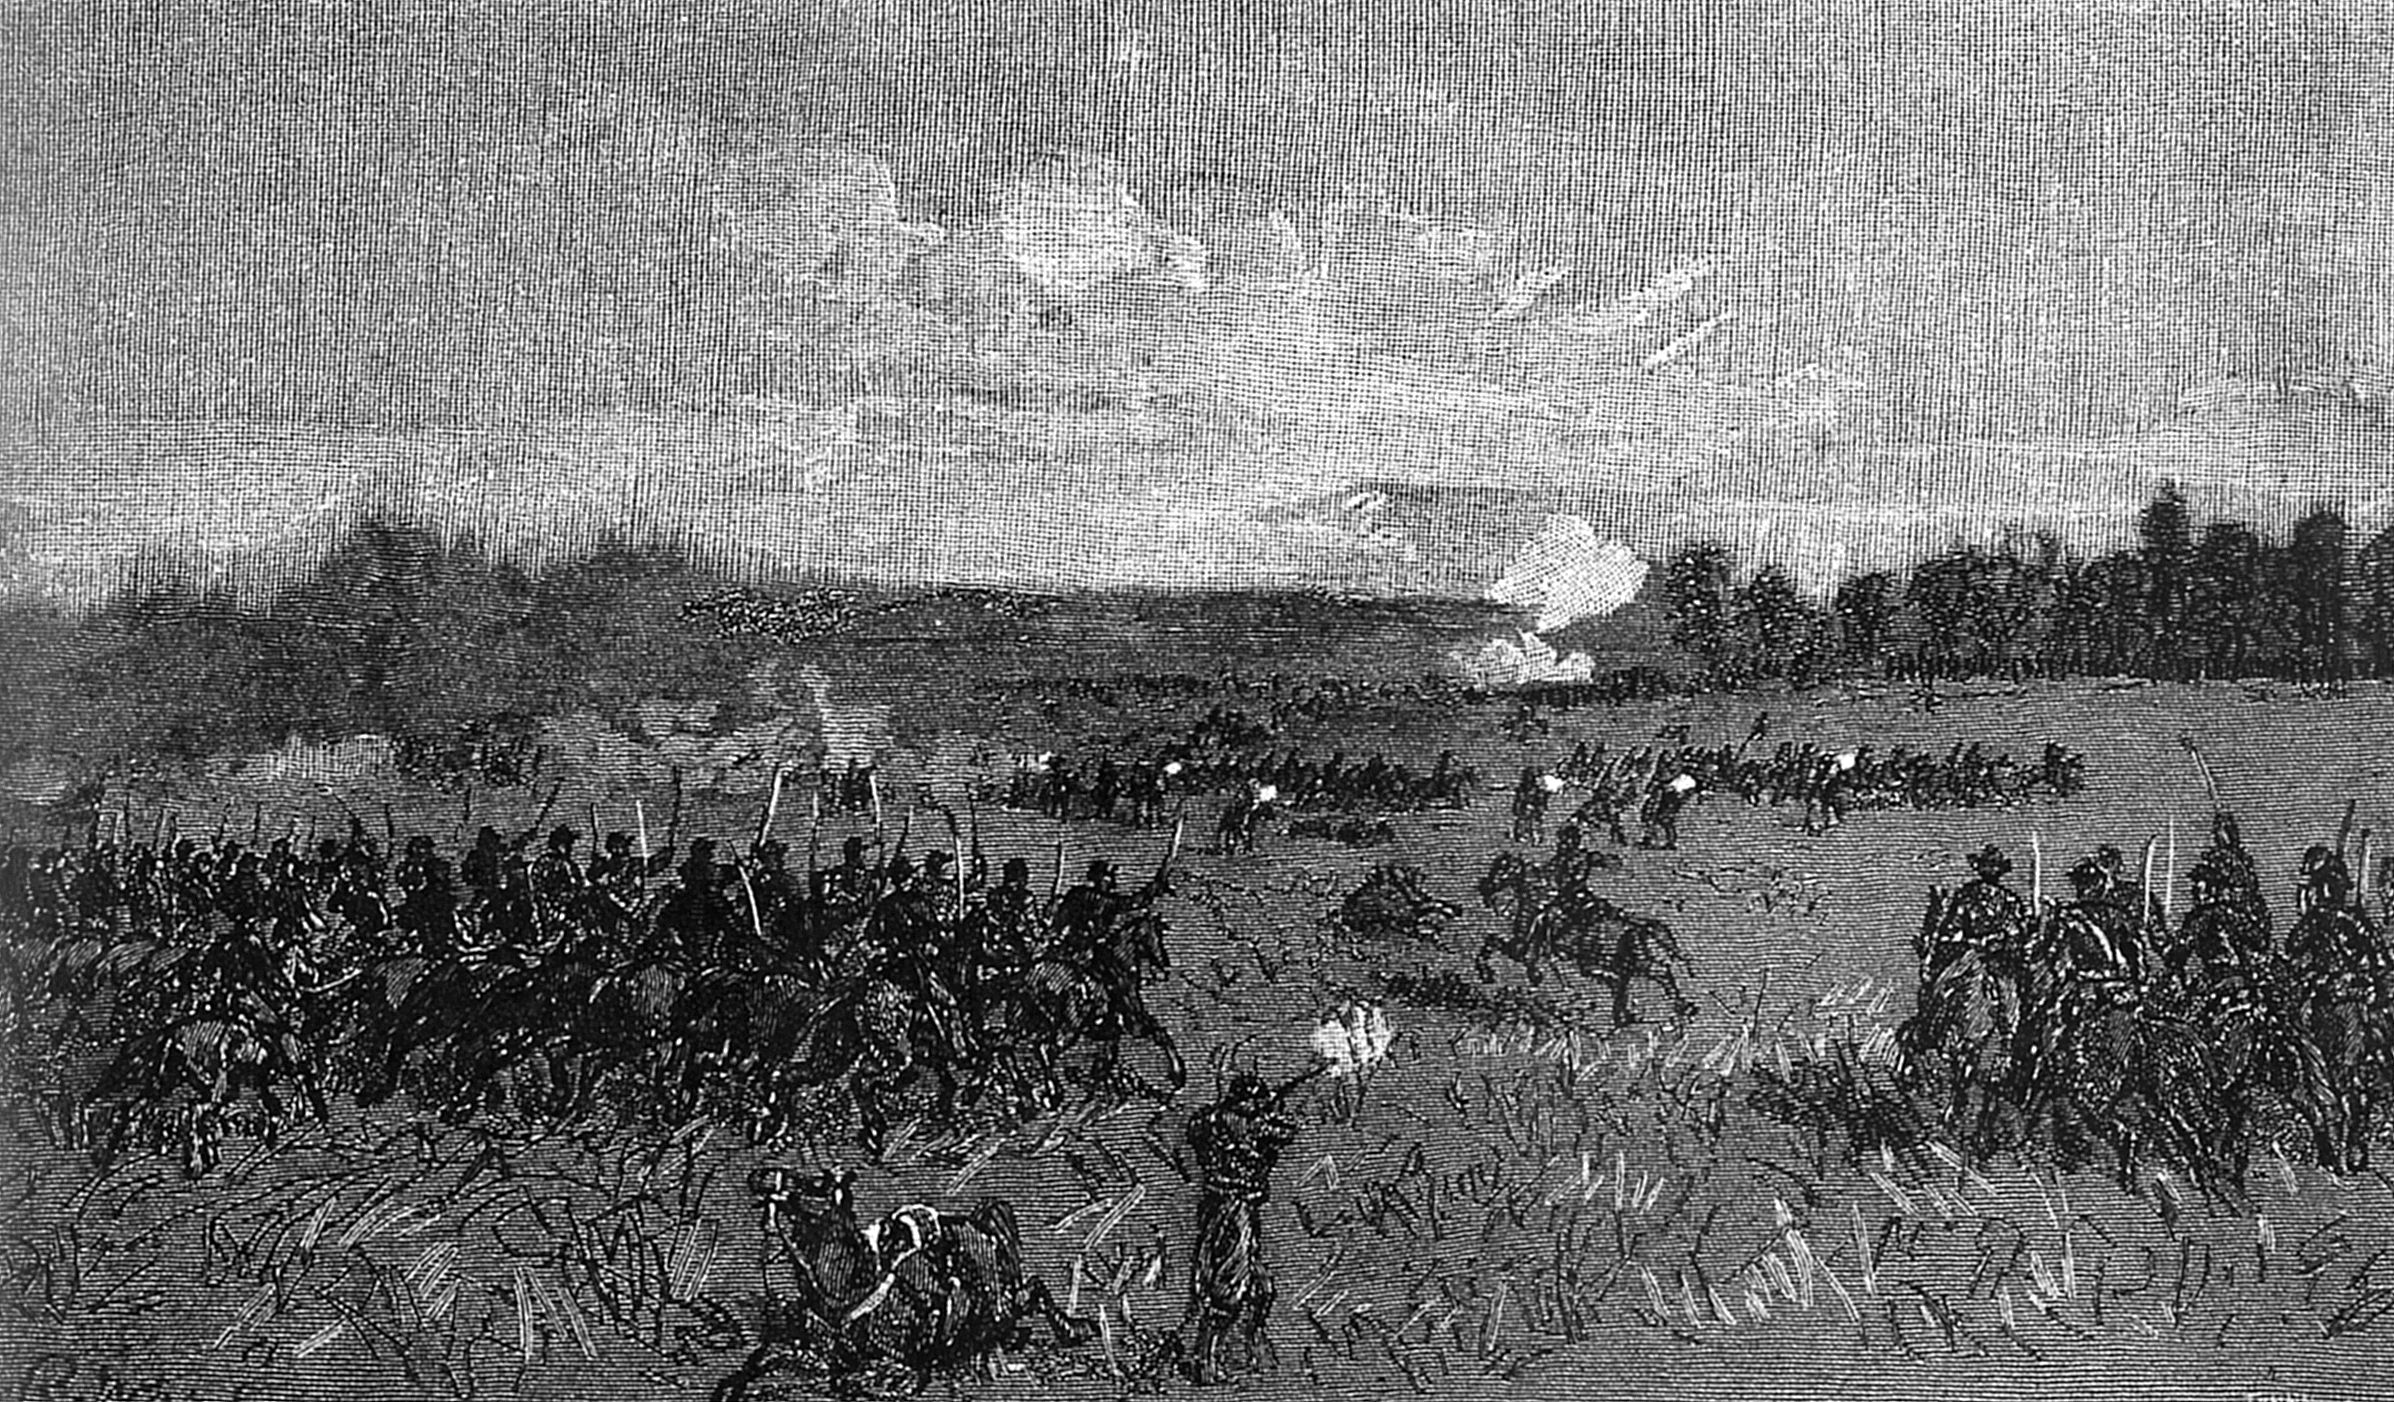 Battlefield artist Alfred Waud sketched the charge of the 1st Virginia Cavalry and the countercharge by the 1st Michigan in the rolling Pennsylvania farmland.